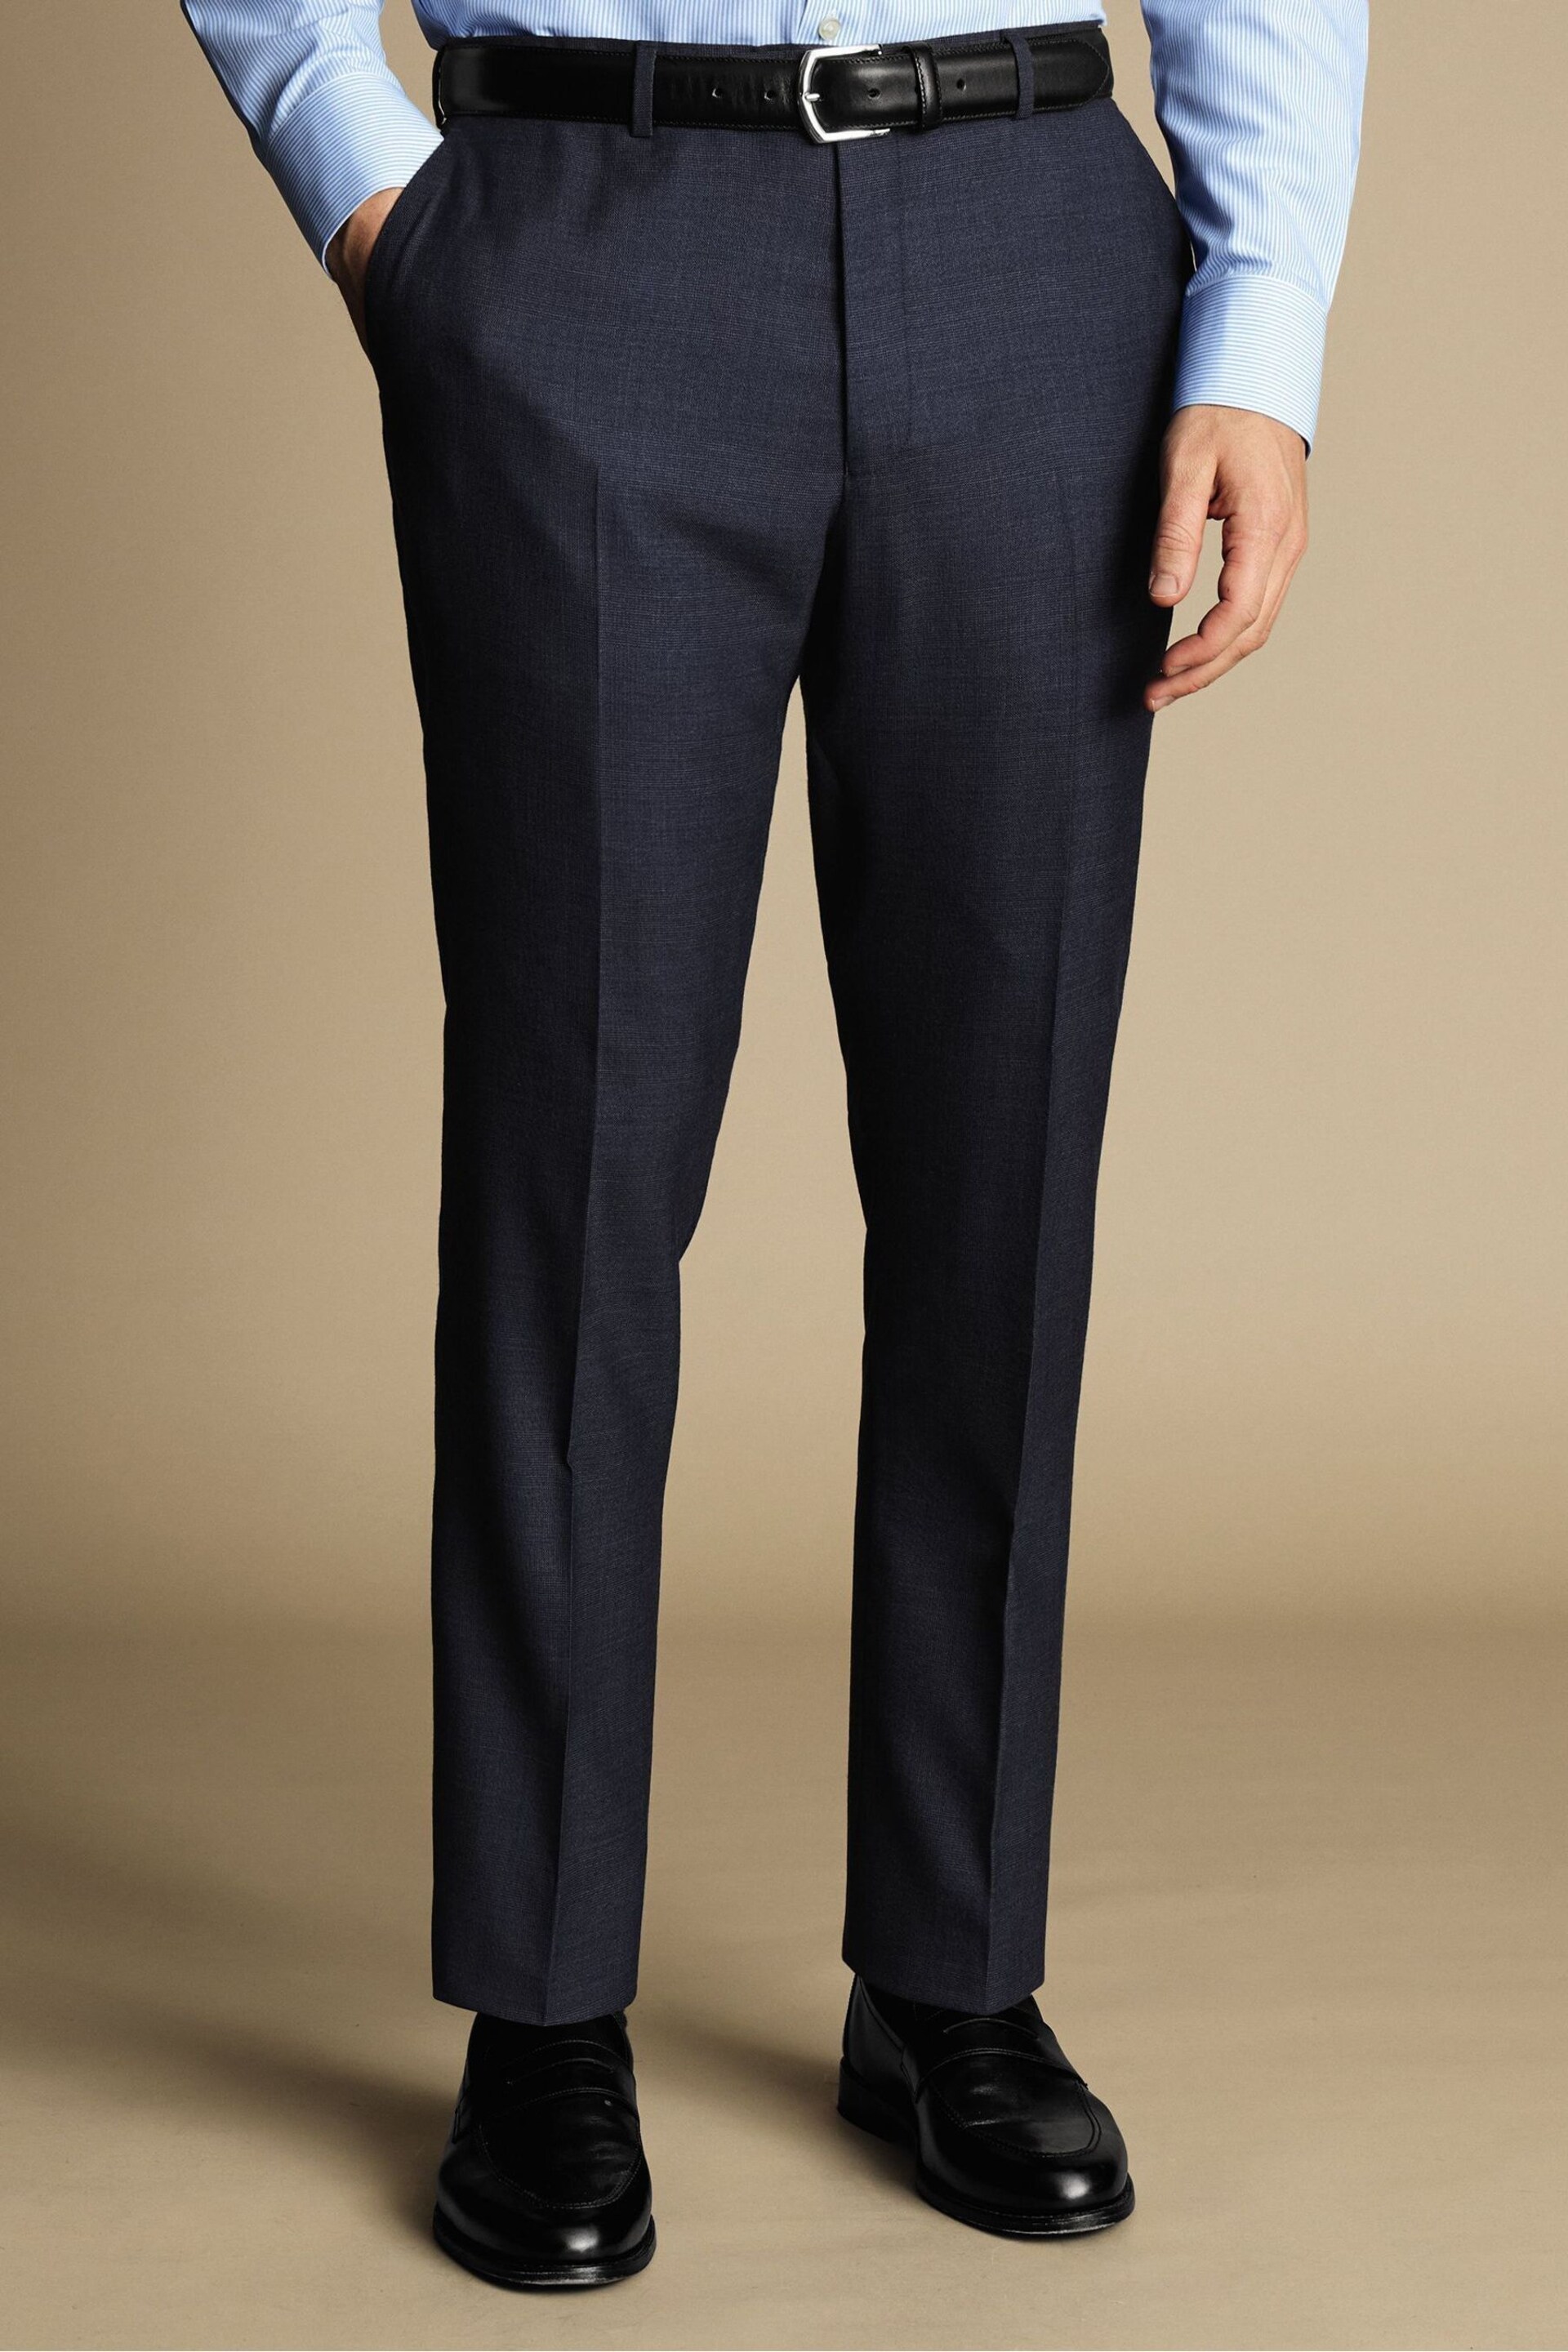 Charles Tyrwhitt Blue Heather  Prince Of Wales Slim Fit Suit Trousers - Image 1 of 3